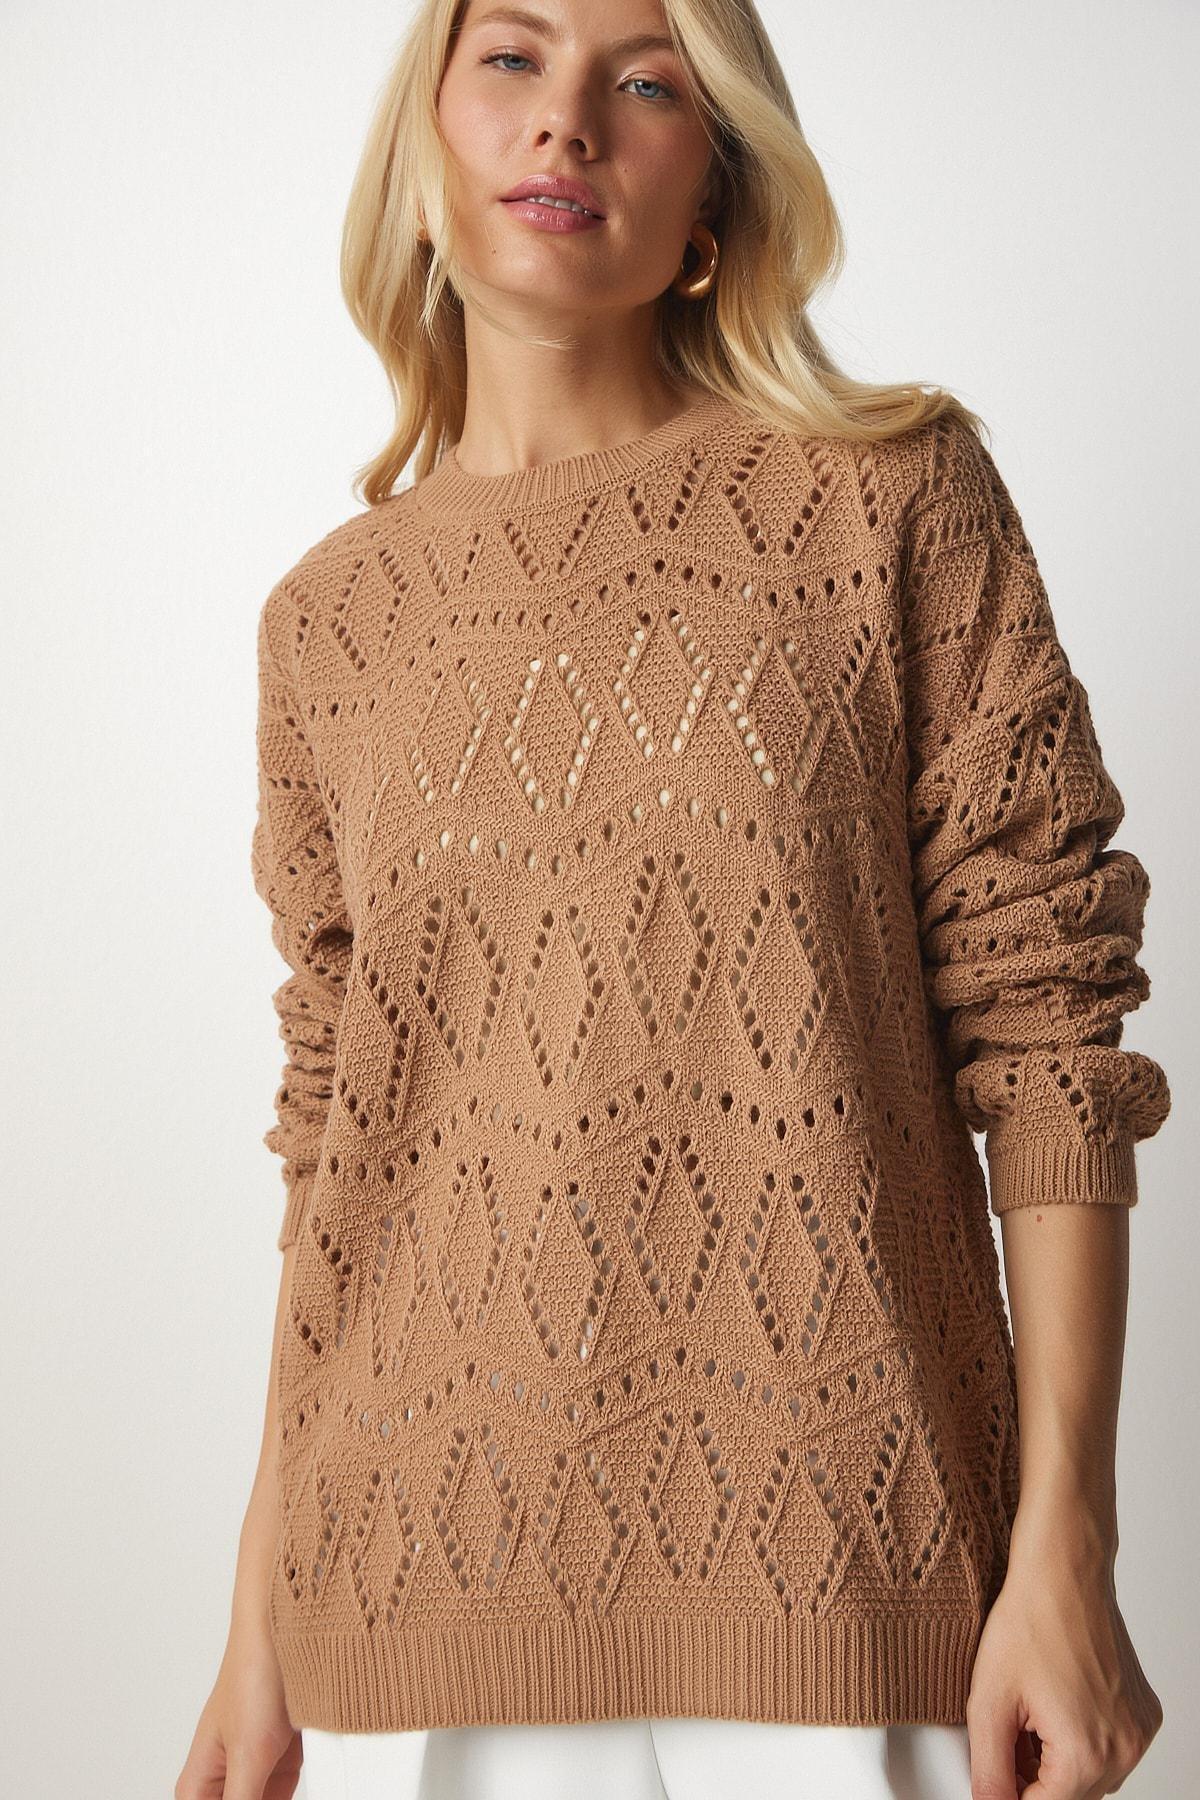 Happiness Istanbul - Brown Openwork Knitwear Sweater